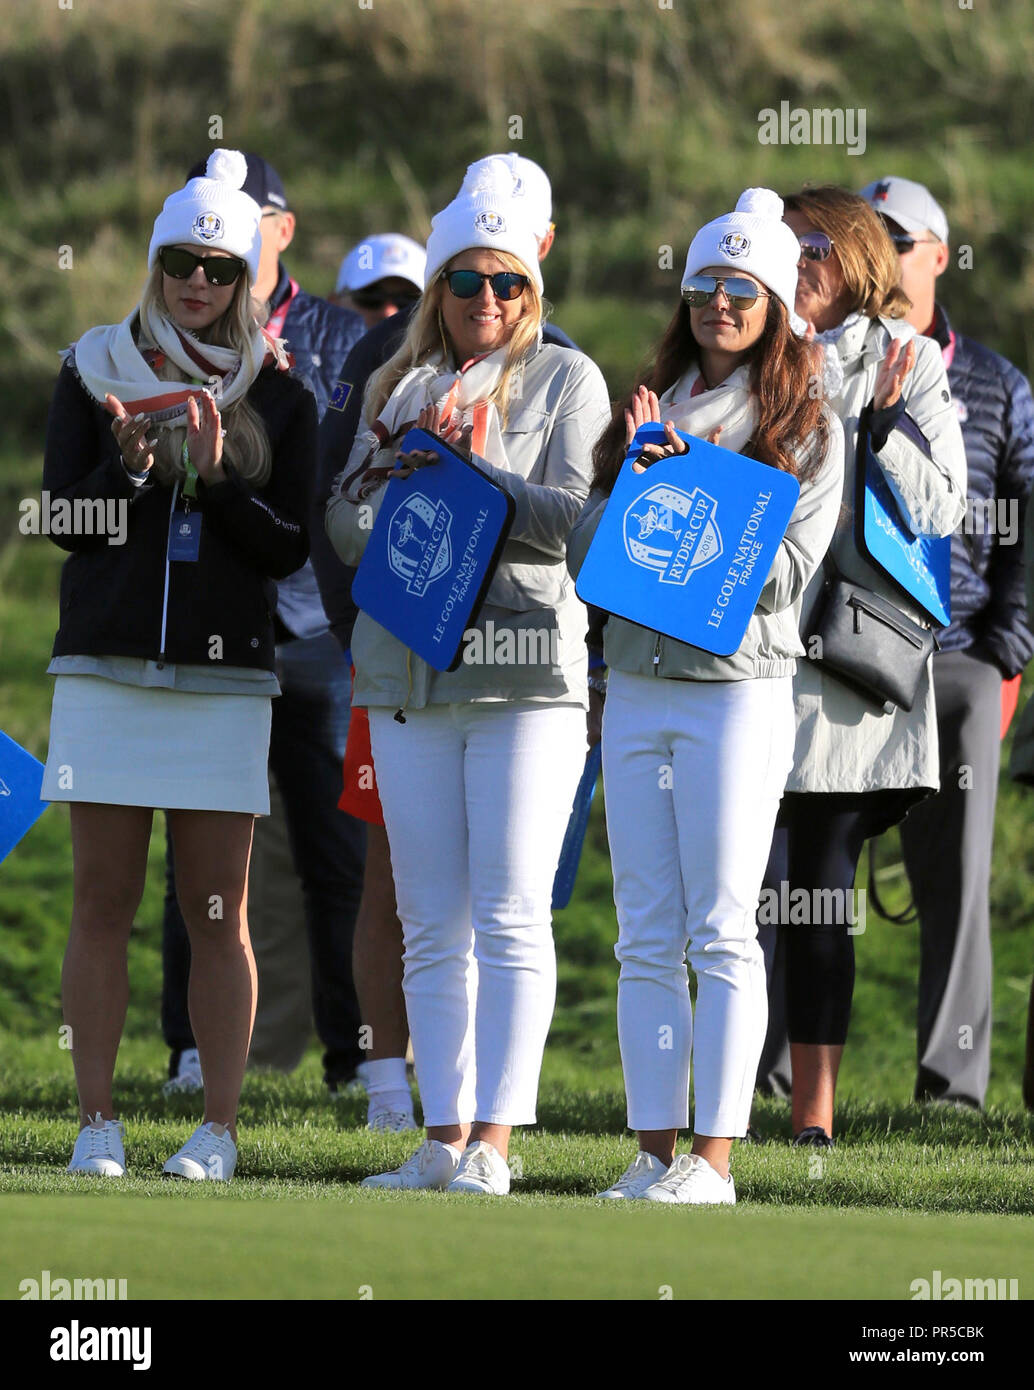 Katie Poulter, wife of Ian Poulter (centre) and Kelley Cahill (left), girlfriend of Jon Rahm during the Fourballs match on day two of the Ryder Cup at Le Golf National, Saint-Quentin-en-Yvelines, Paris. Stock Photo